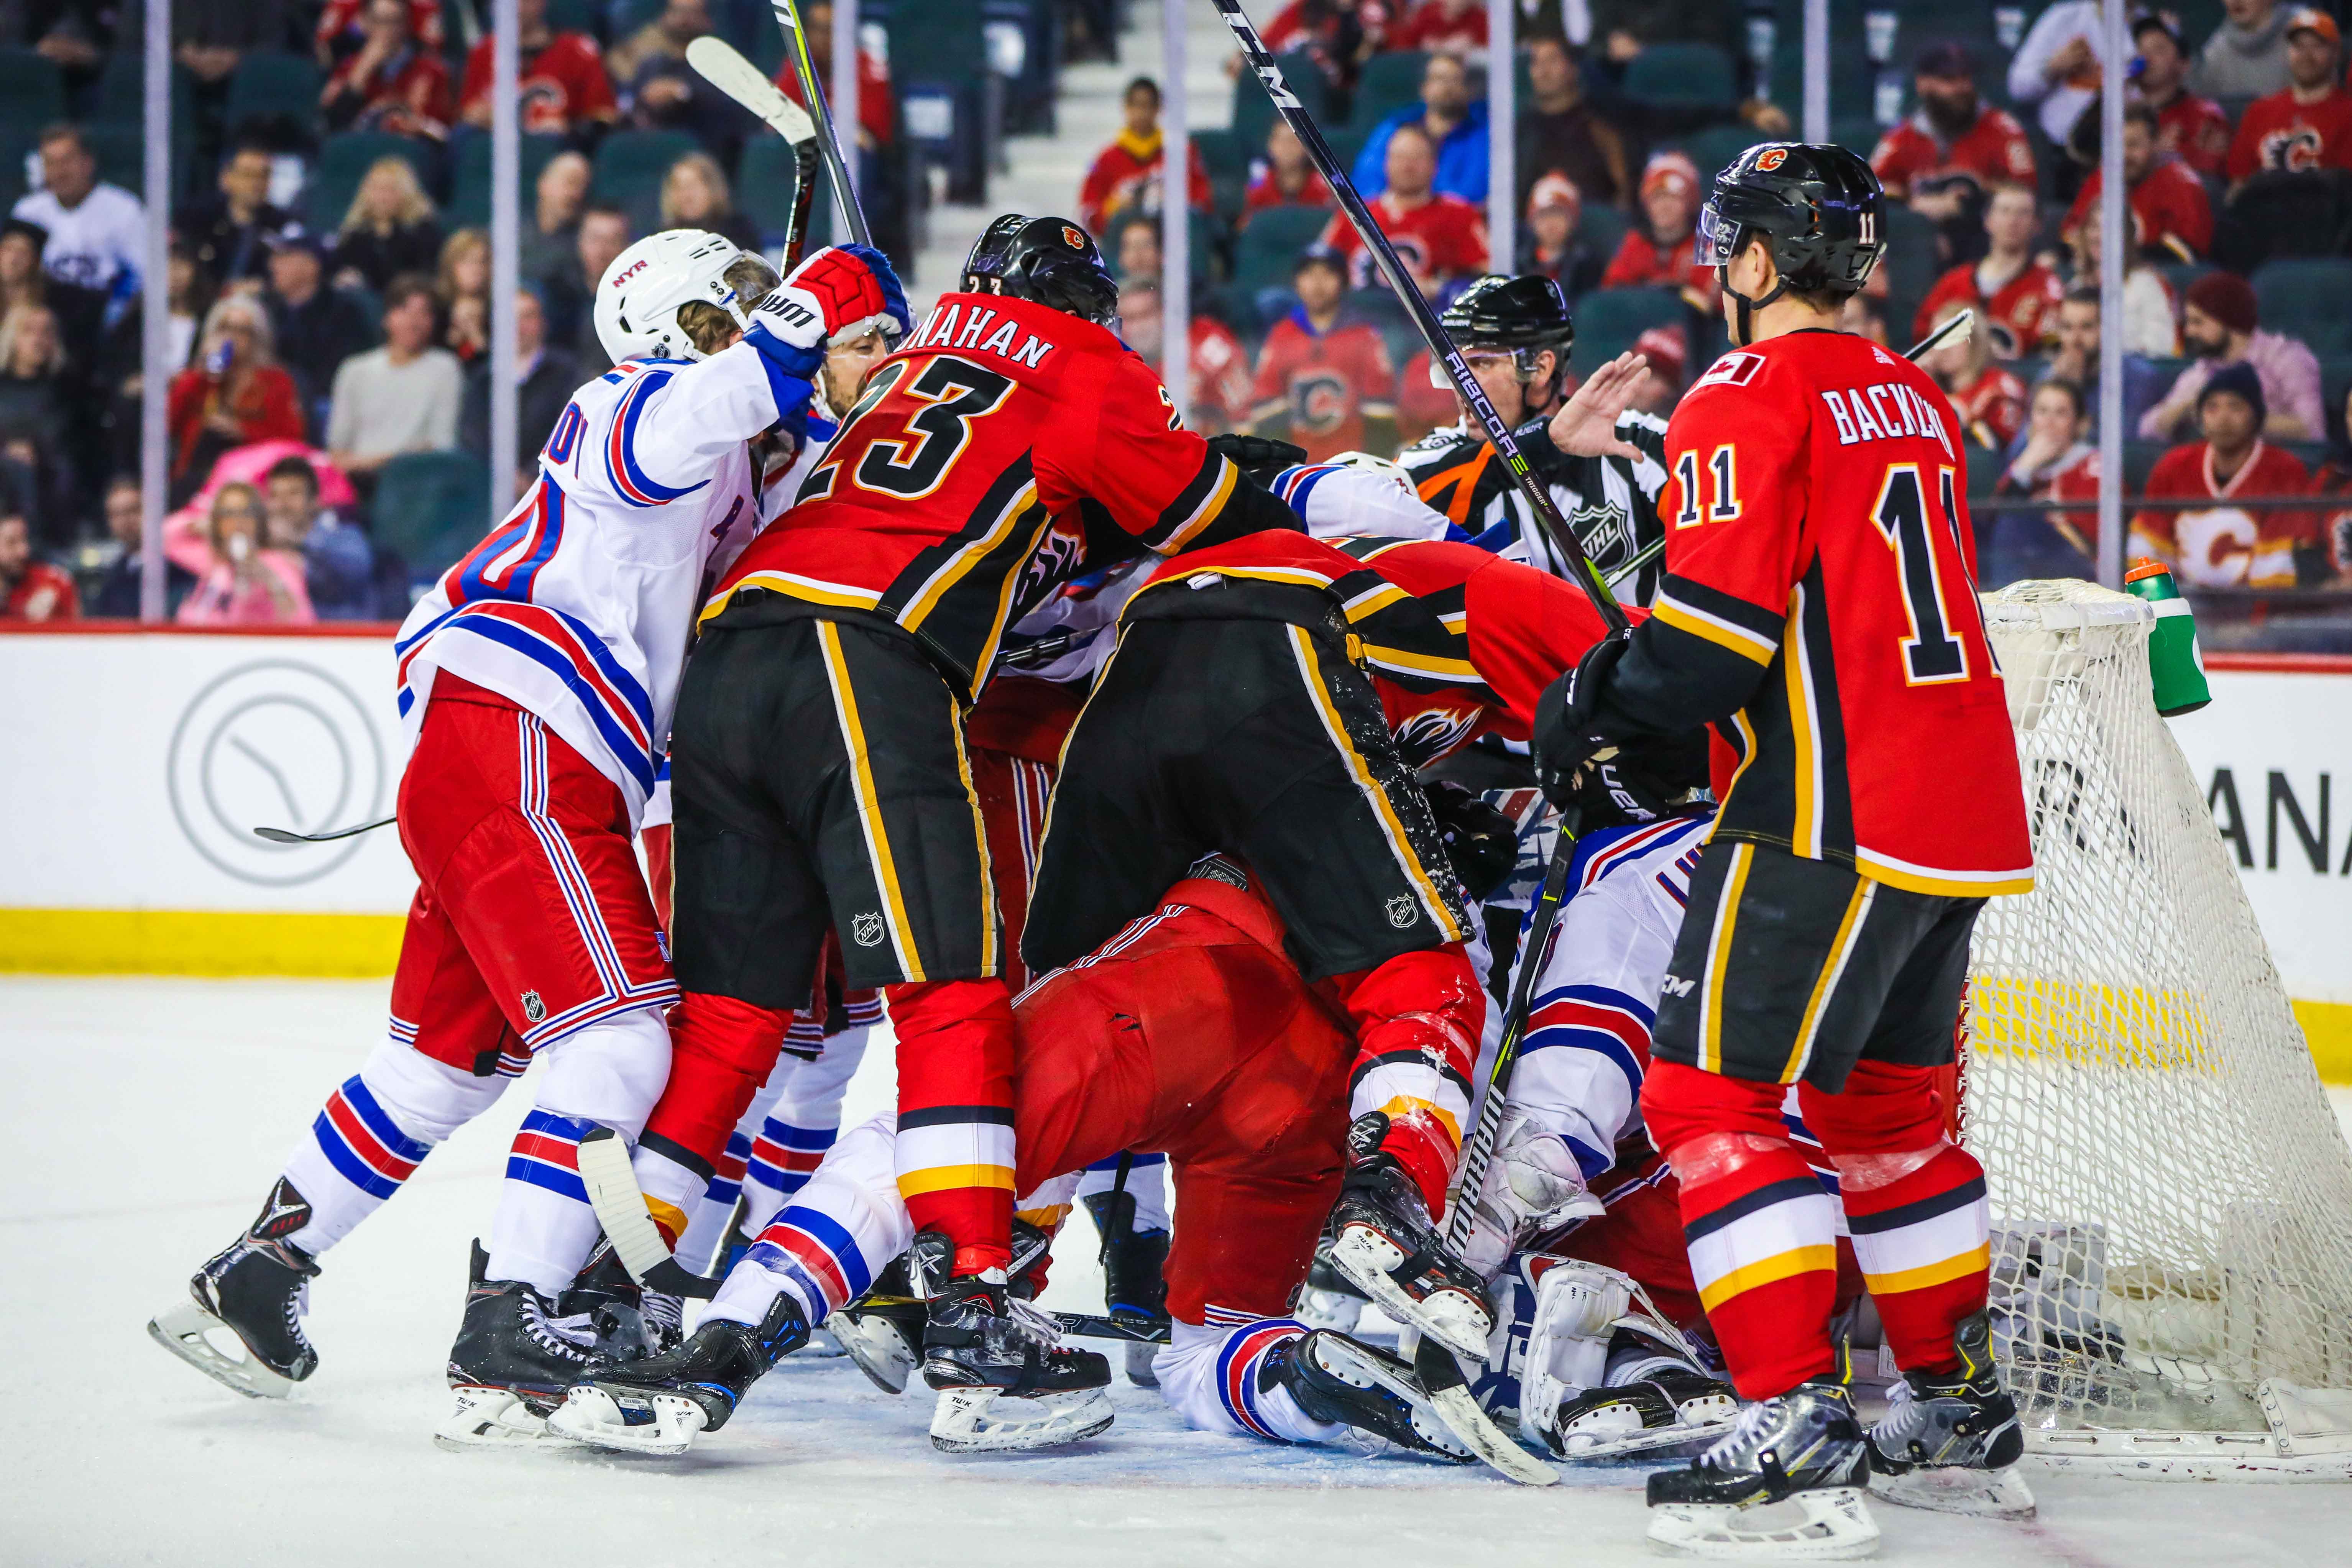 Mar 2, 2018; Calgary, Alberta, CAN; Calgary Flames players fight with New York Rangers players in front of New York Rangers goaltender Henrik Lundqvist (30) net during the third period at Scotiabank Saddledome. New York Rangers won 3-1.